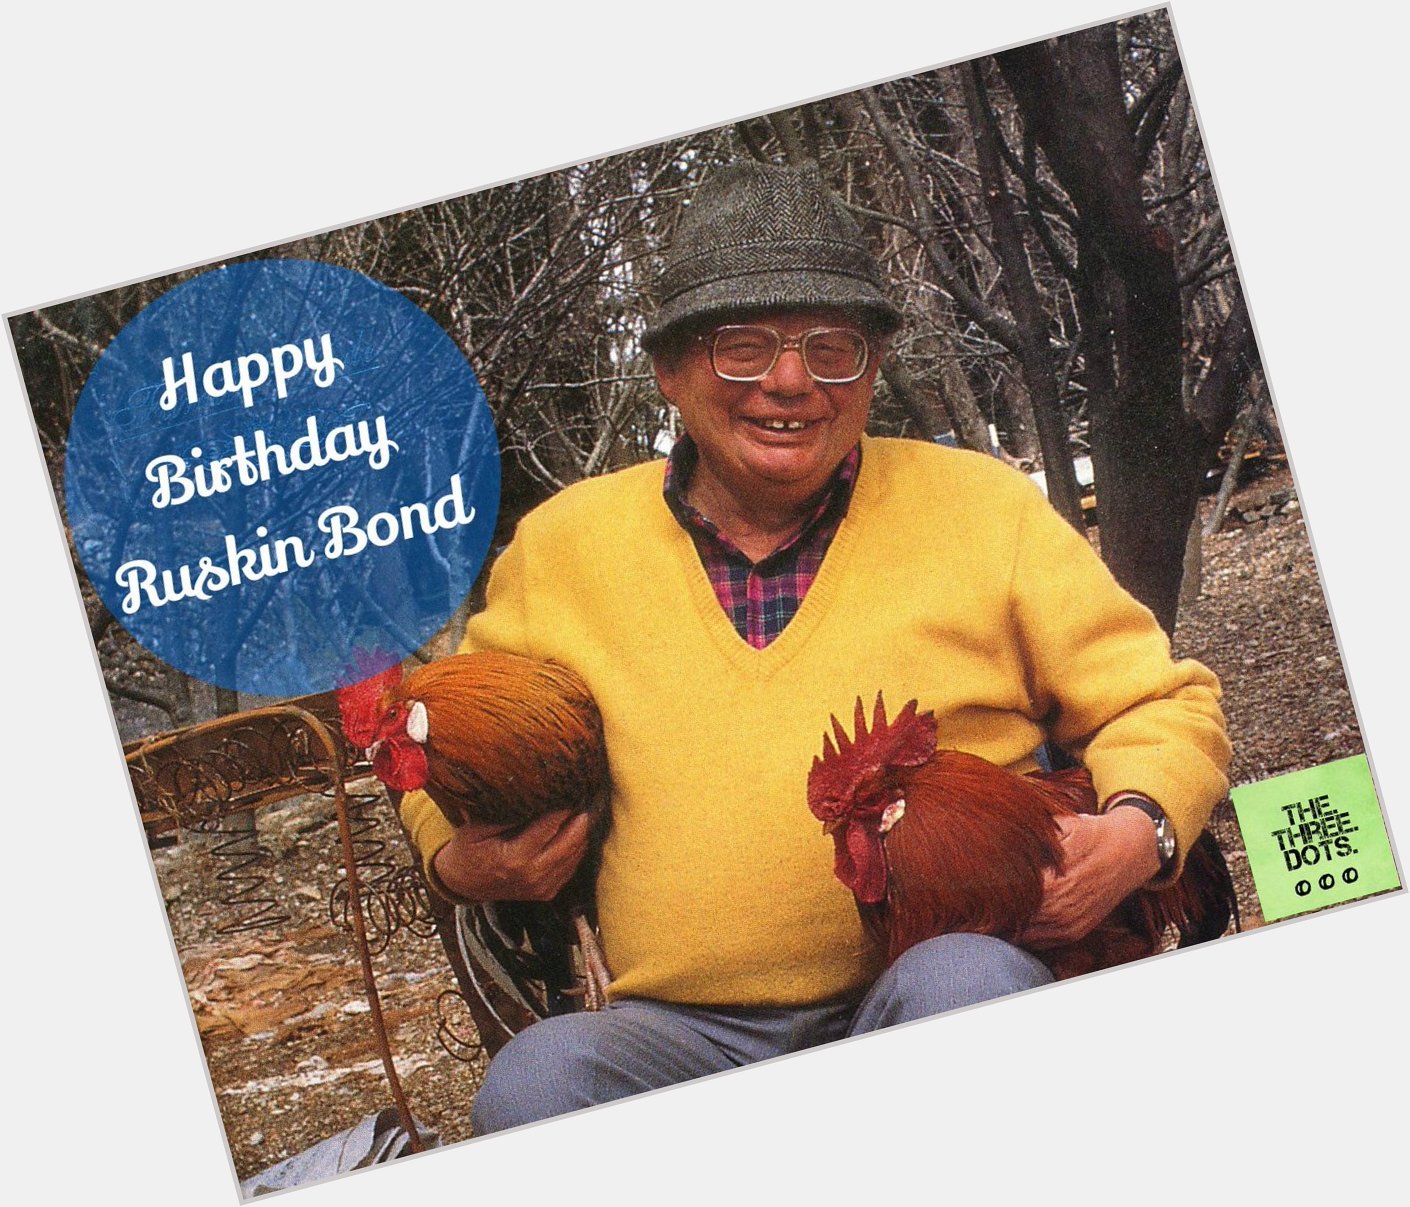 A modest writer, an ultimate story-teller and a true inspiration turns 81 today. 
A Very Happy Birthday Ruskin Bond! 